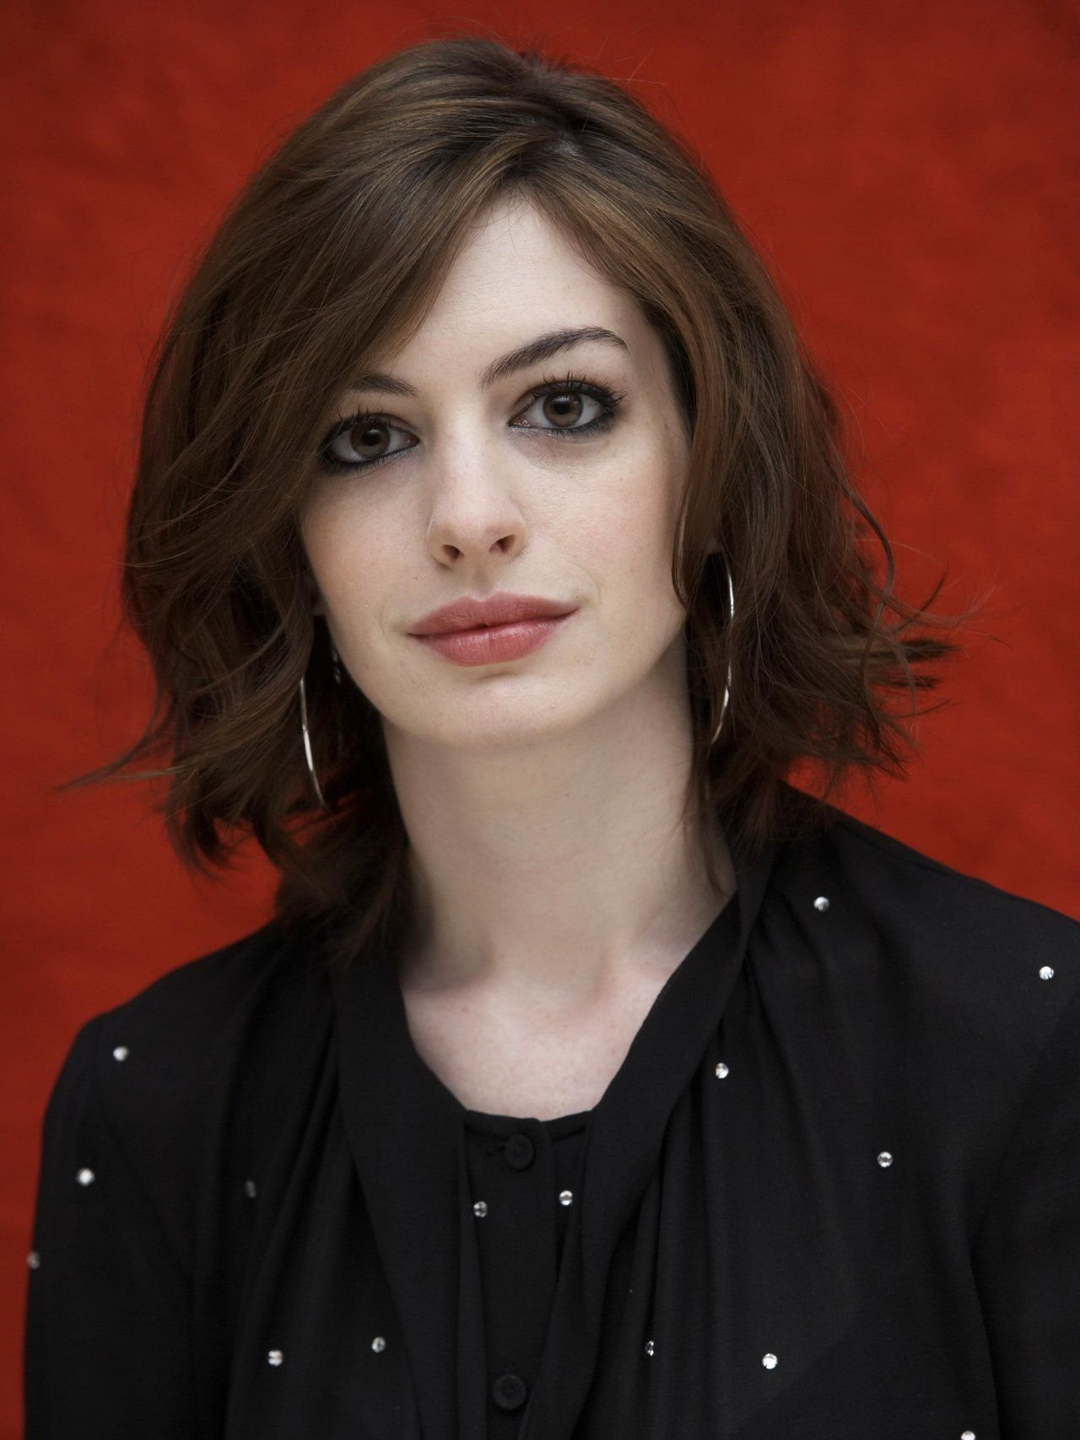 Anne Hathaway where is she now